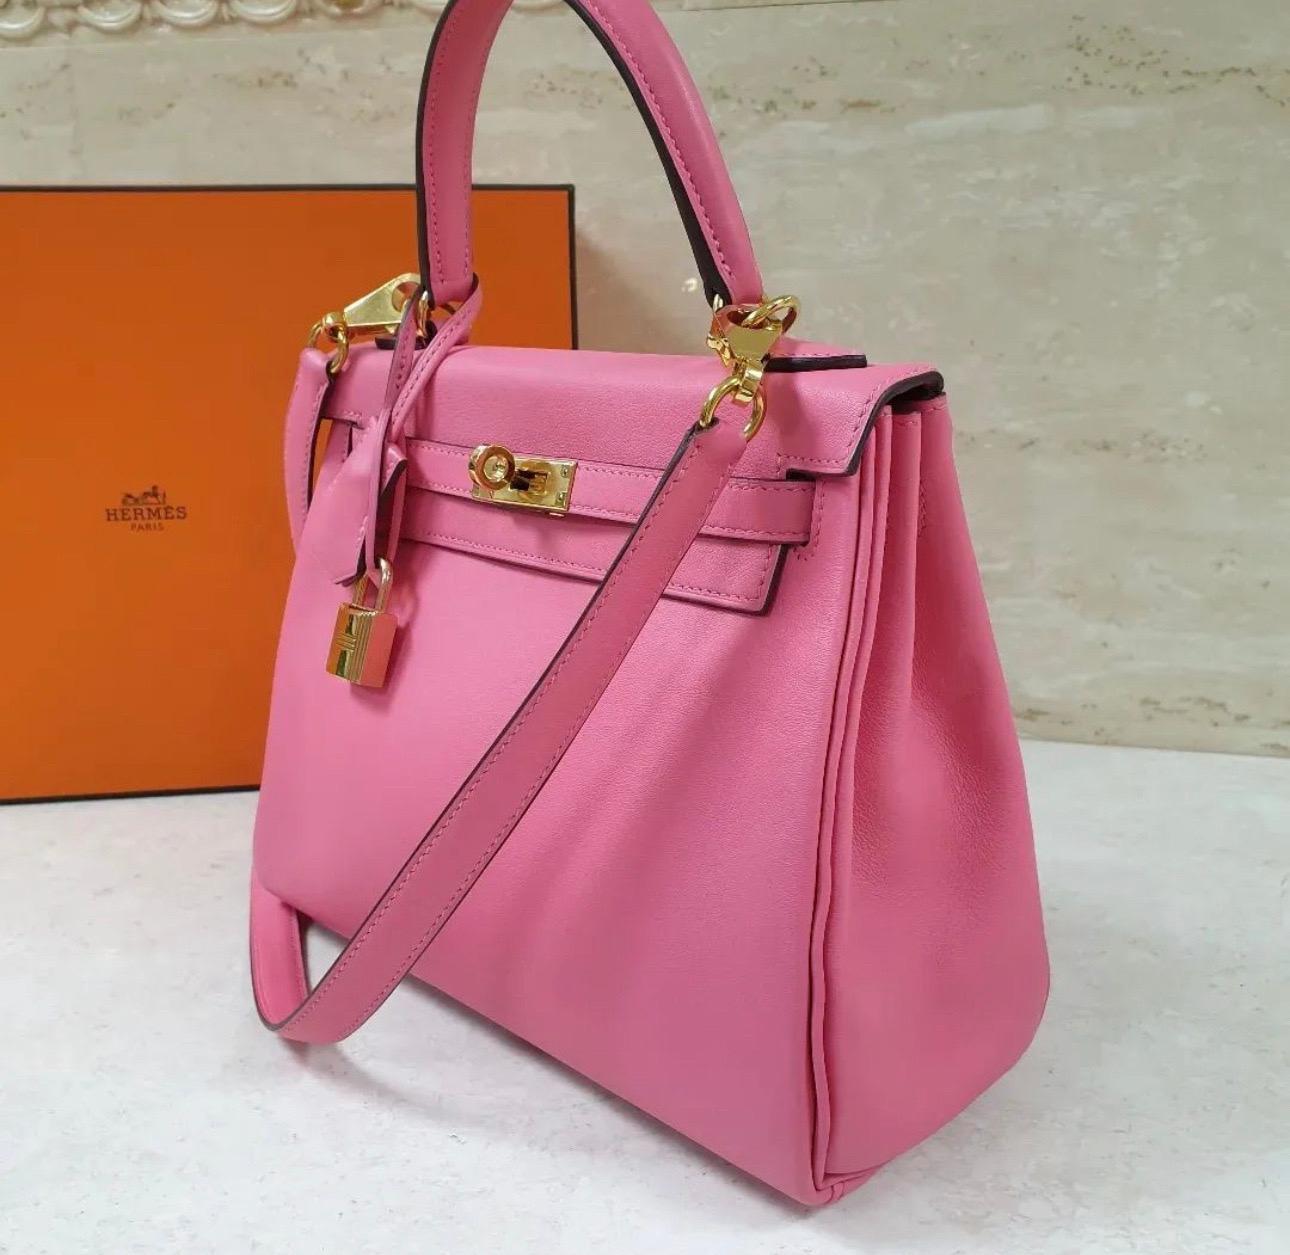 Colour: Roze Azalee
Veau Swift leather
Gold plated HW
2019
With clochette, lock and keys

very good condition

Bababebi auth certificate is included.

No box. No dust bag.